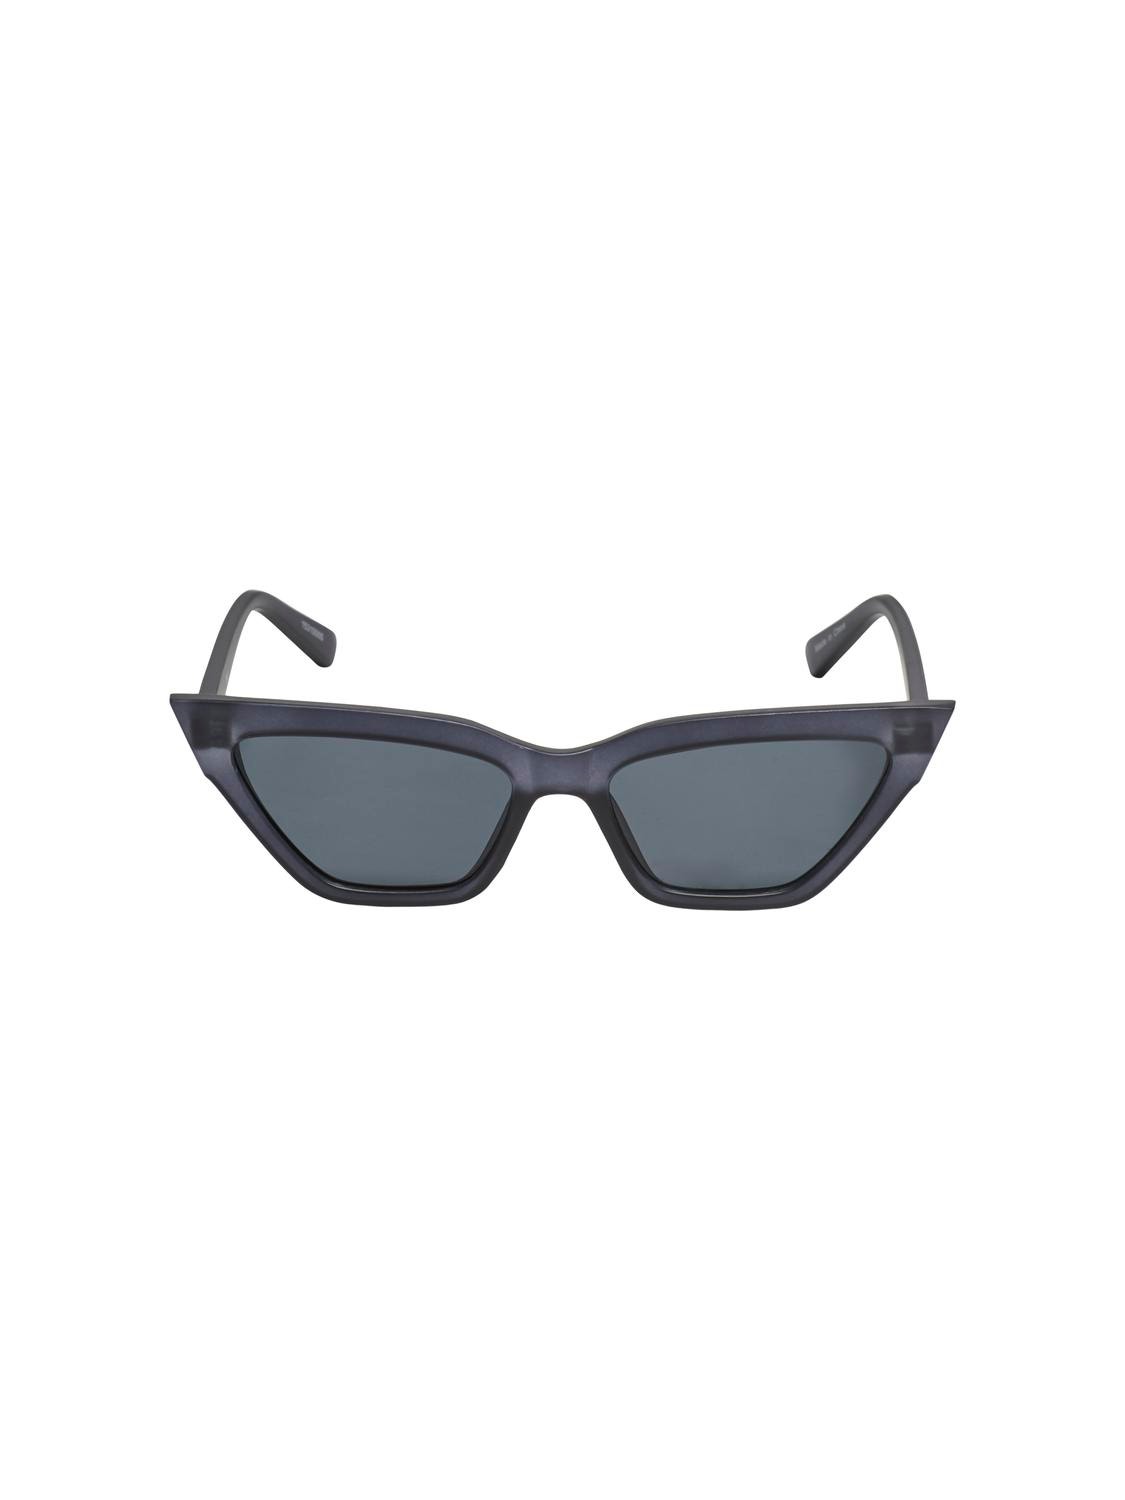 ONLY Classic sunglasses -Naval Academy - 15310005